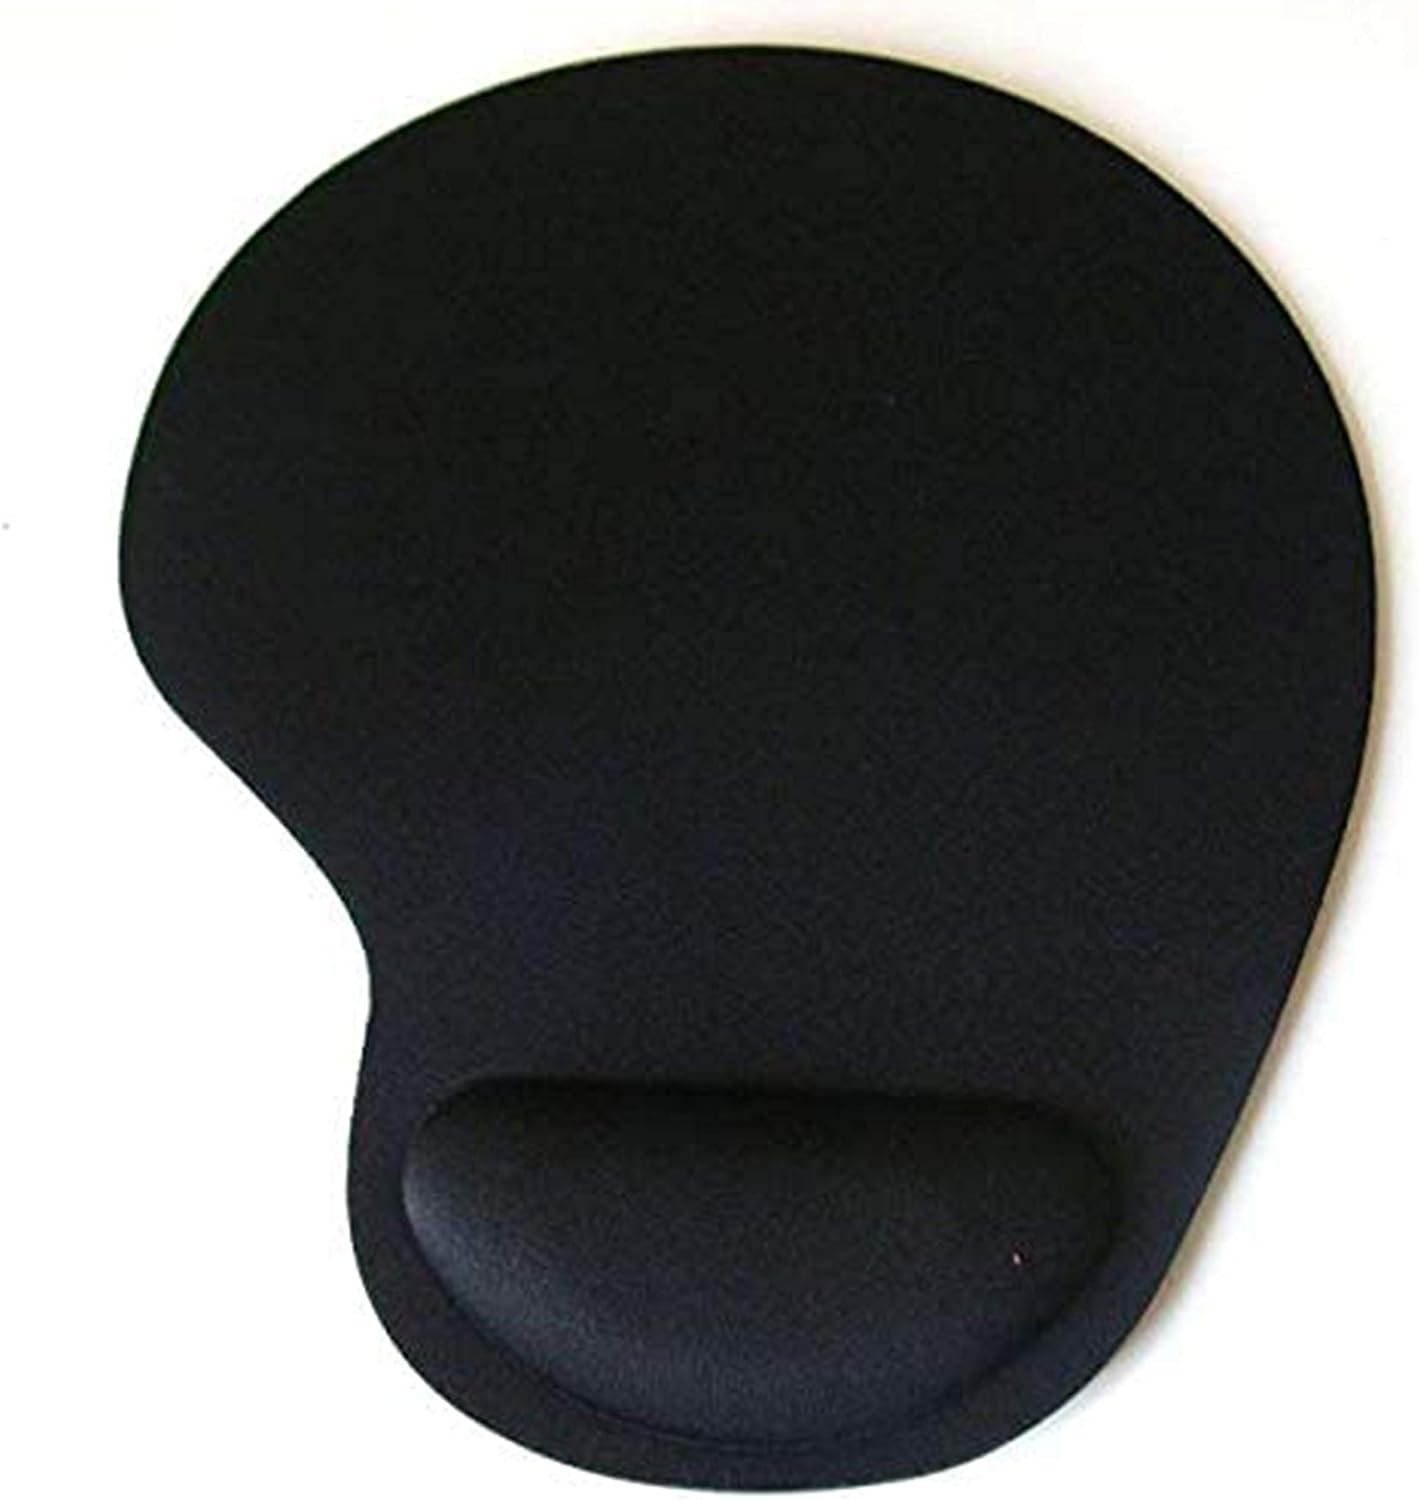 PC-Home MP1102 Mouse Pad w/Gel-Filled Wrist Rest (Black) #3100000649